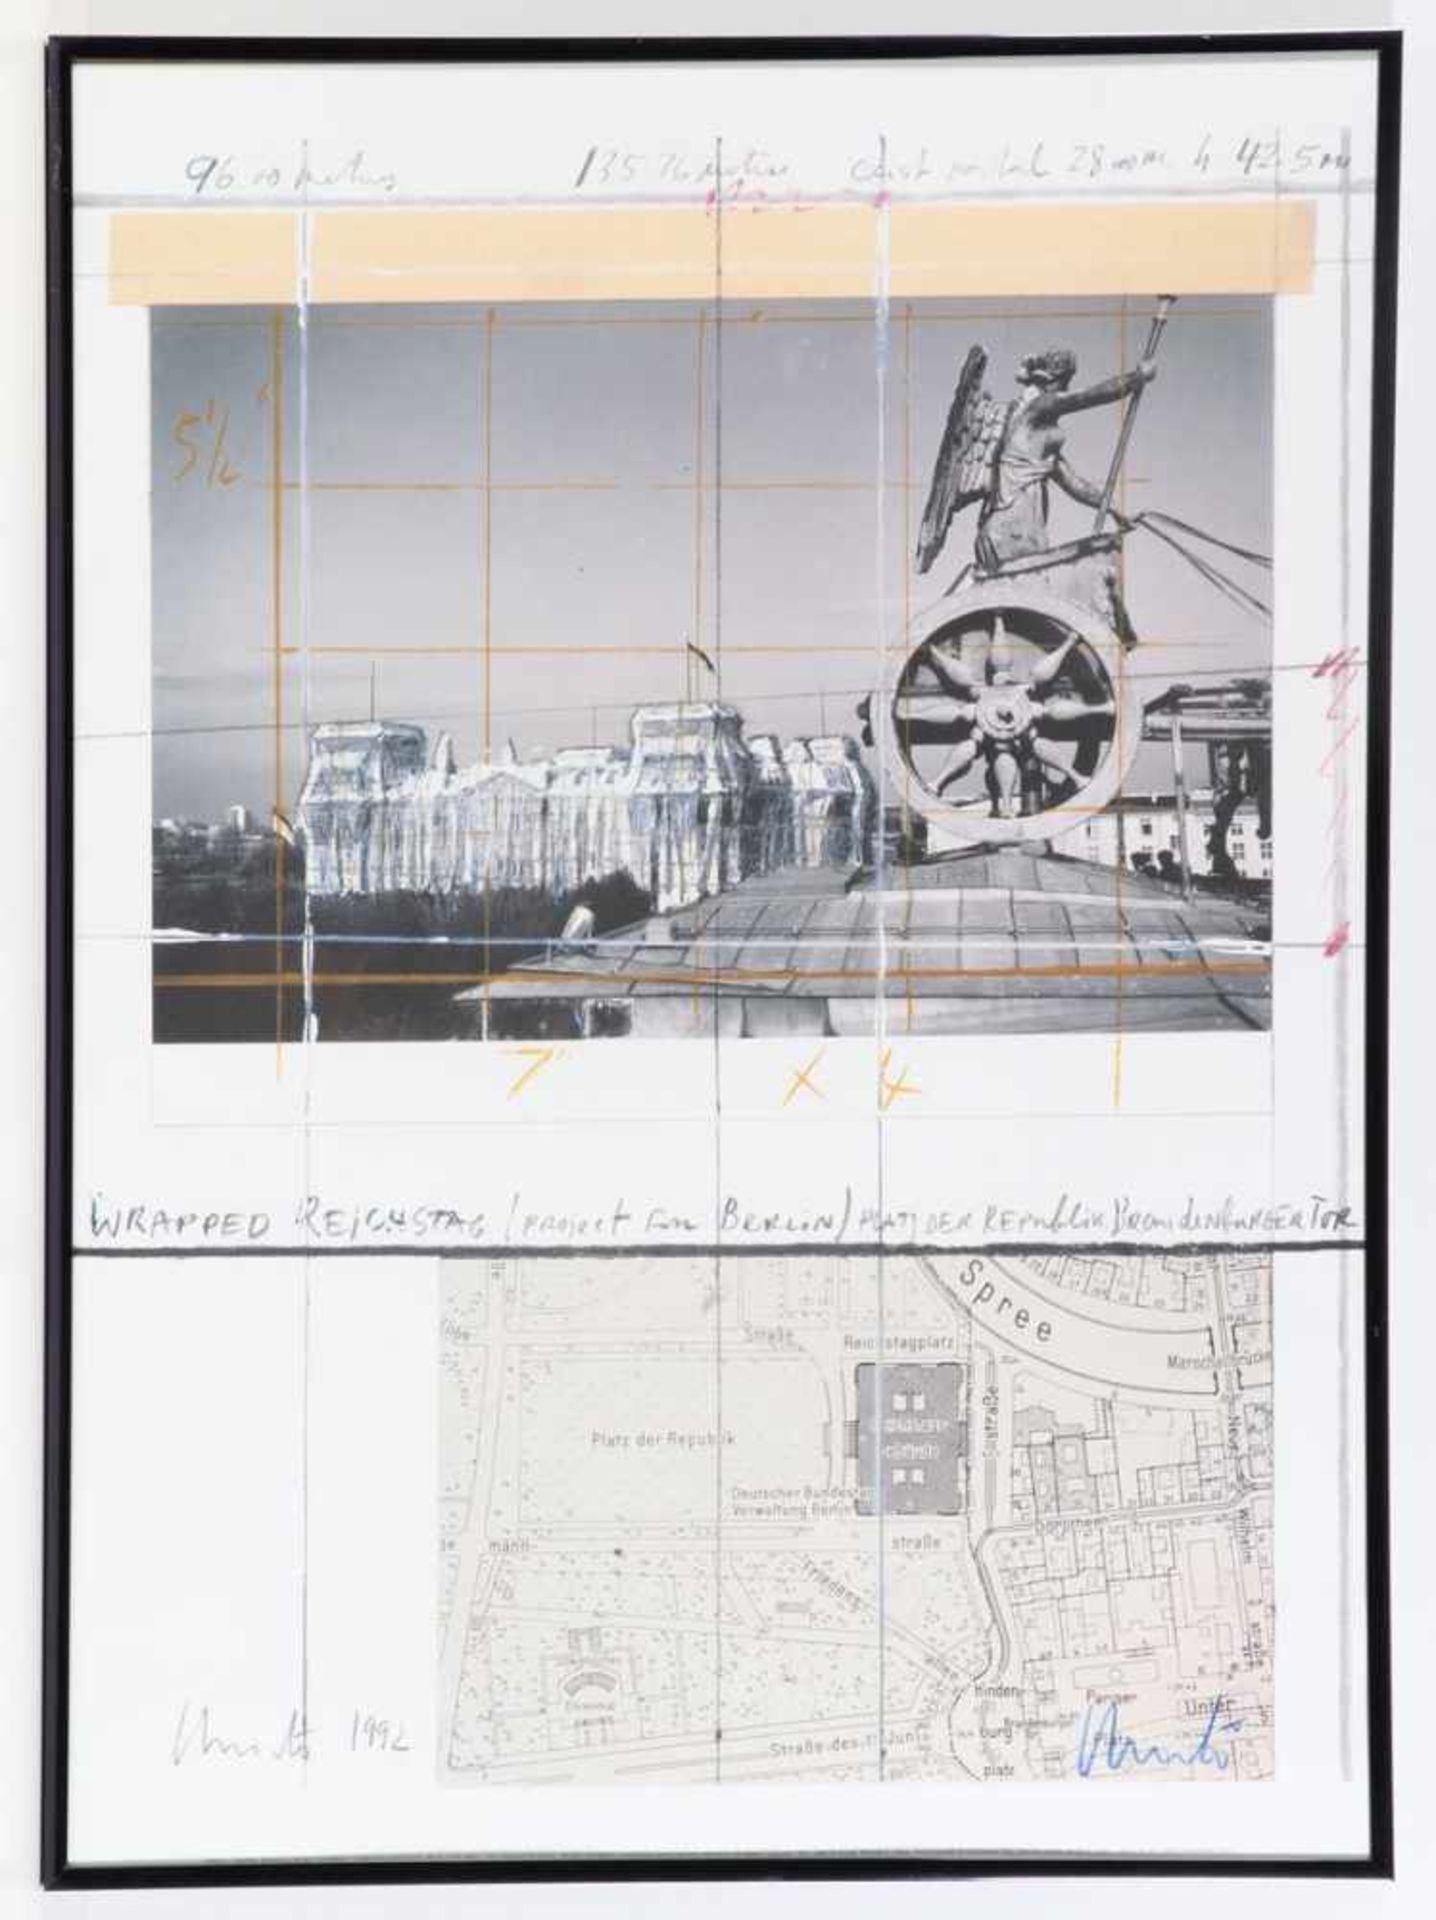 Christo1935 Gabrovo - "Wrapped Reichstag / Project for Berlin" - Farboffset/Papier. 63,5 x 50 cm, 70 - Image 2 of 2